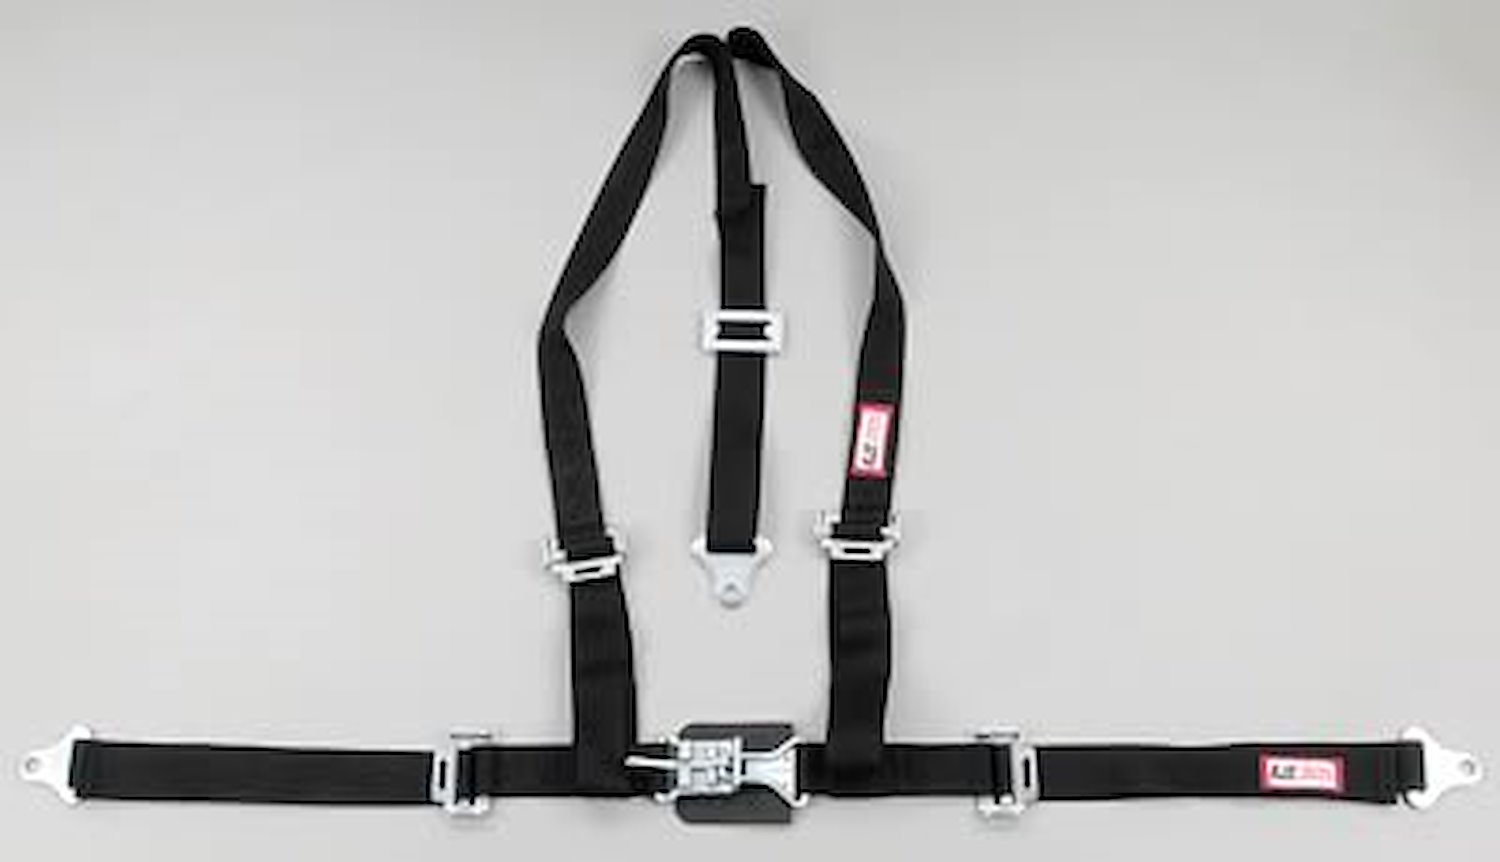 NON-SFI L&L HARNESS 3 PULL DOWN Lap Belt w/adjuster 2 S.H. Individual FLOOR Mount ALL WRAP ENDS HOT PINK